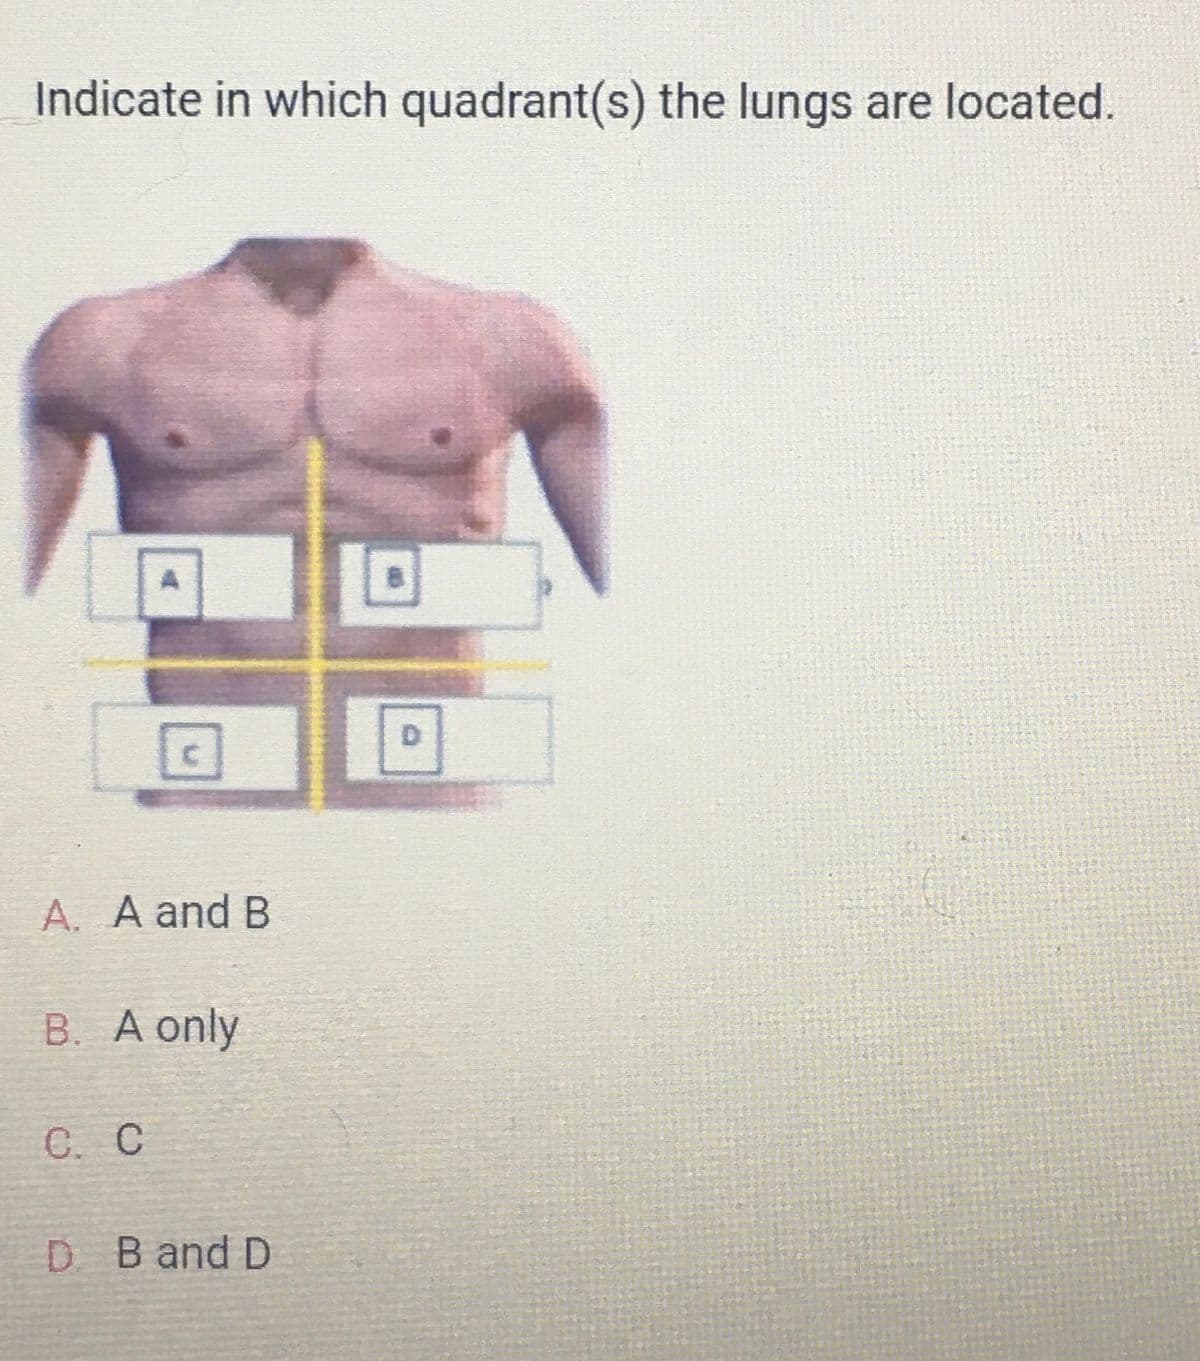 Indicate in which quadrant(s) the lungs are located.
A
C
A. A and B
C. C
B. A only
D. B and D
D